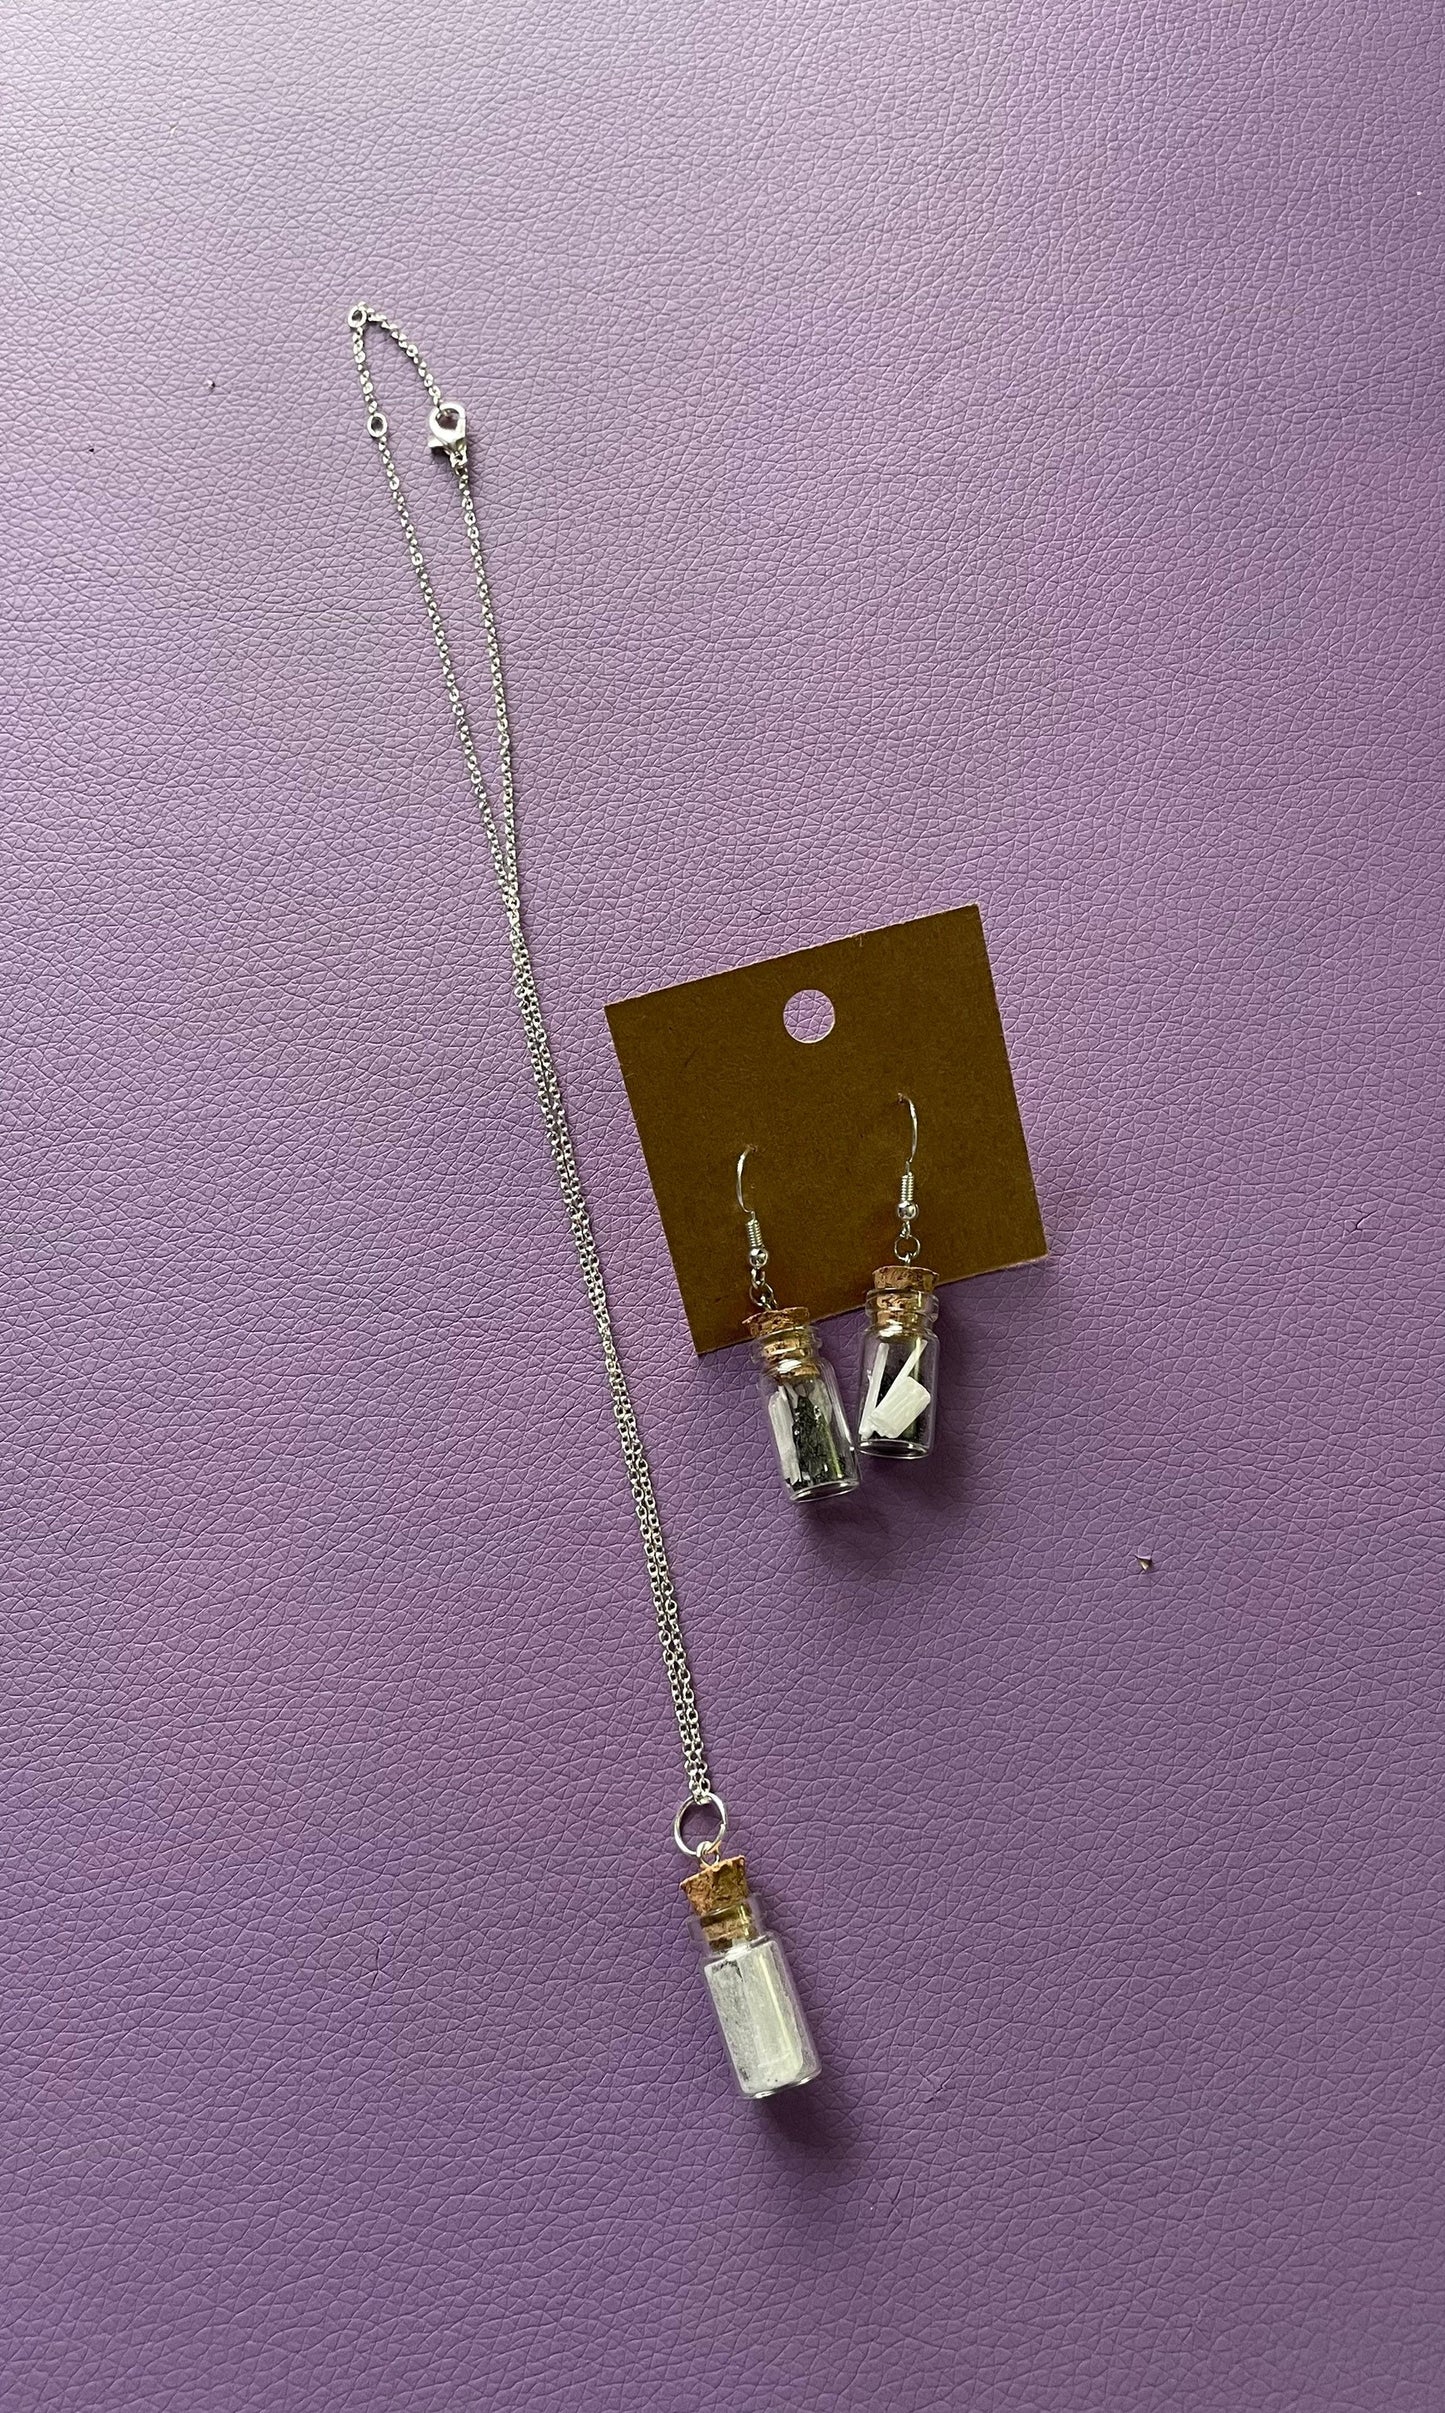 Small bottle earrings and/or necklace filled with a Powerful crystal protection.